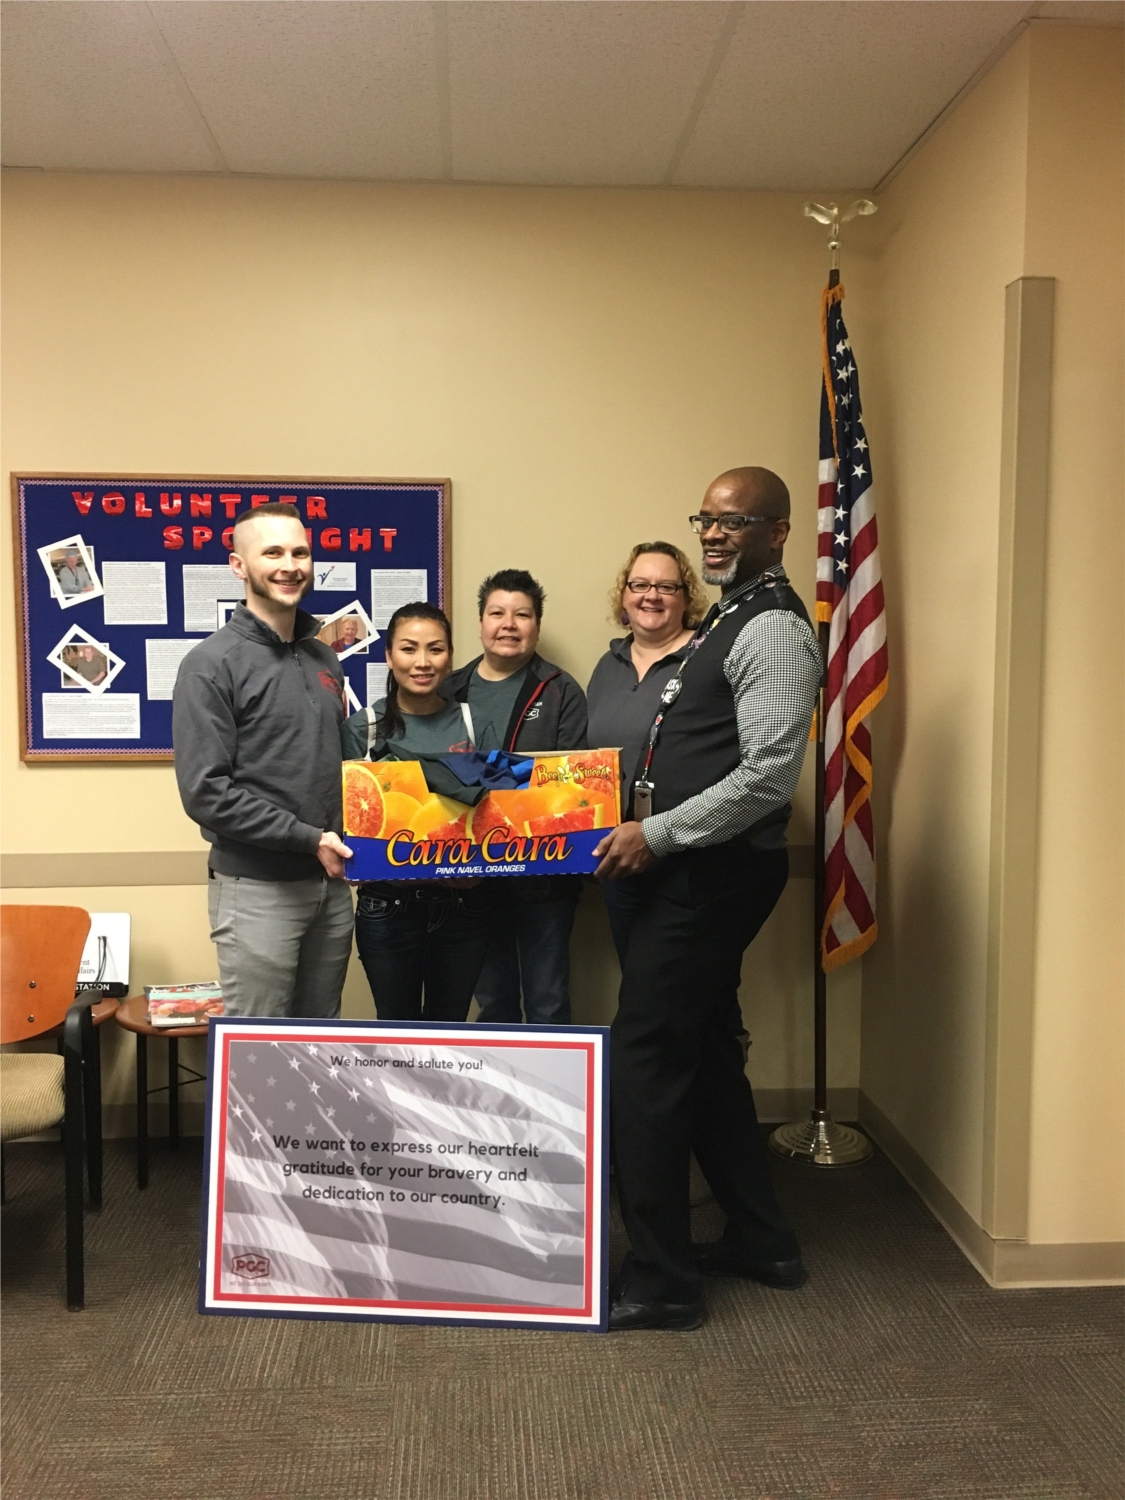 PGC's Well-Being Committee initiative "Spring into Gratitude" supported homeless veterans with a "Thank You" card signed by all employees, as well as  donations of cash and clothing/toiletry items to the Minnesota VA Center.